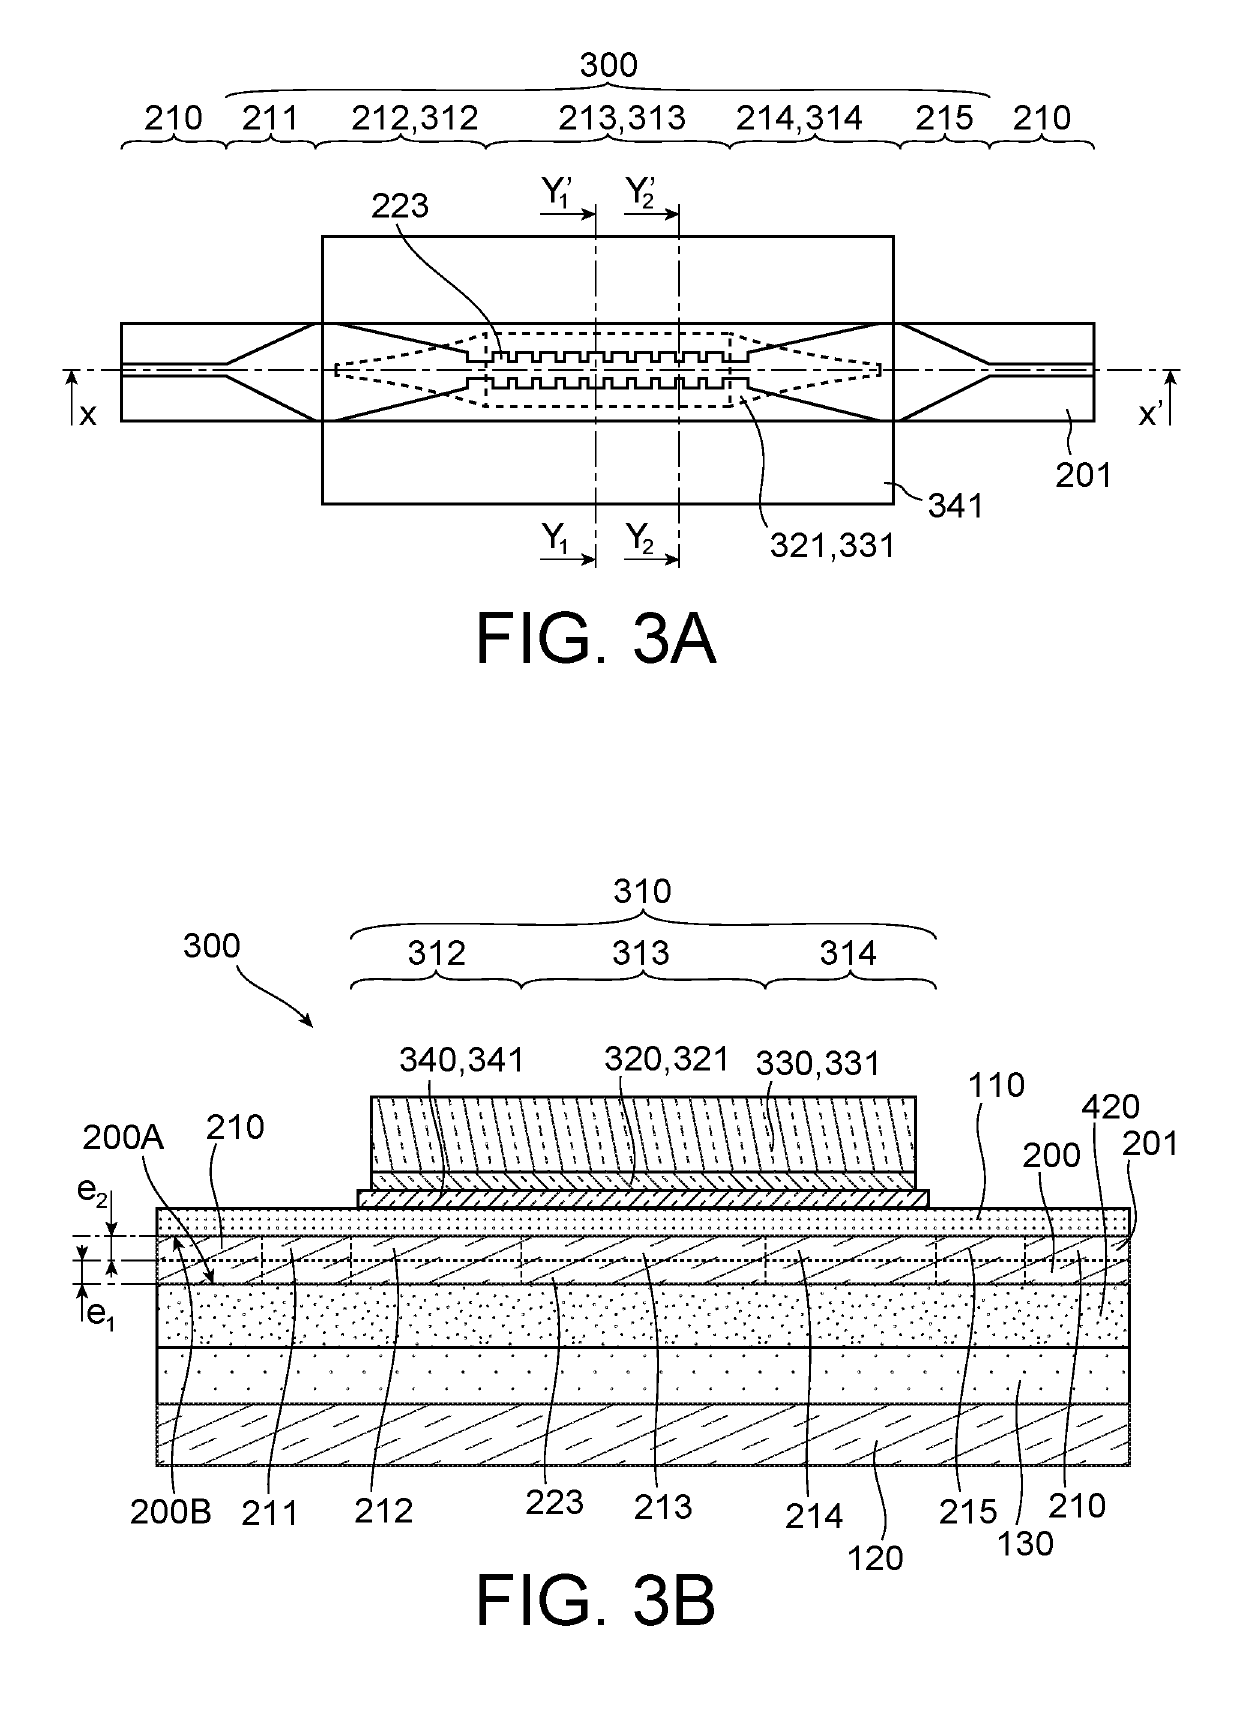 Photonic device comprising a laser optically connected to a silicon waveguide and method for manufacturing such a photonic device